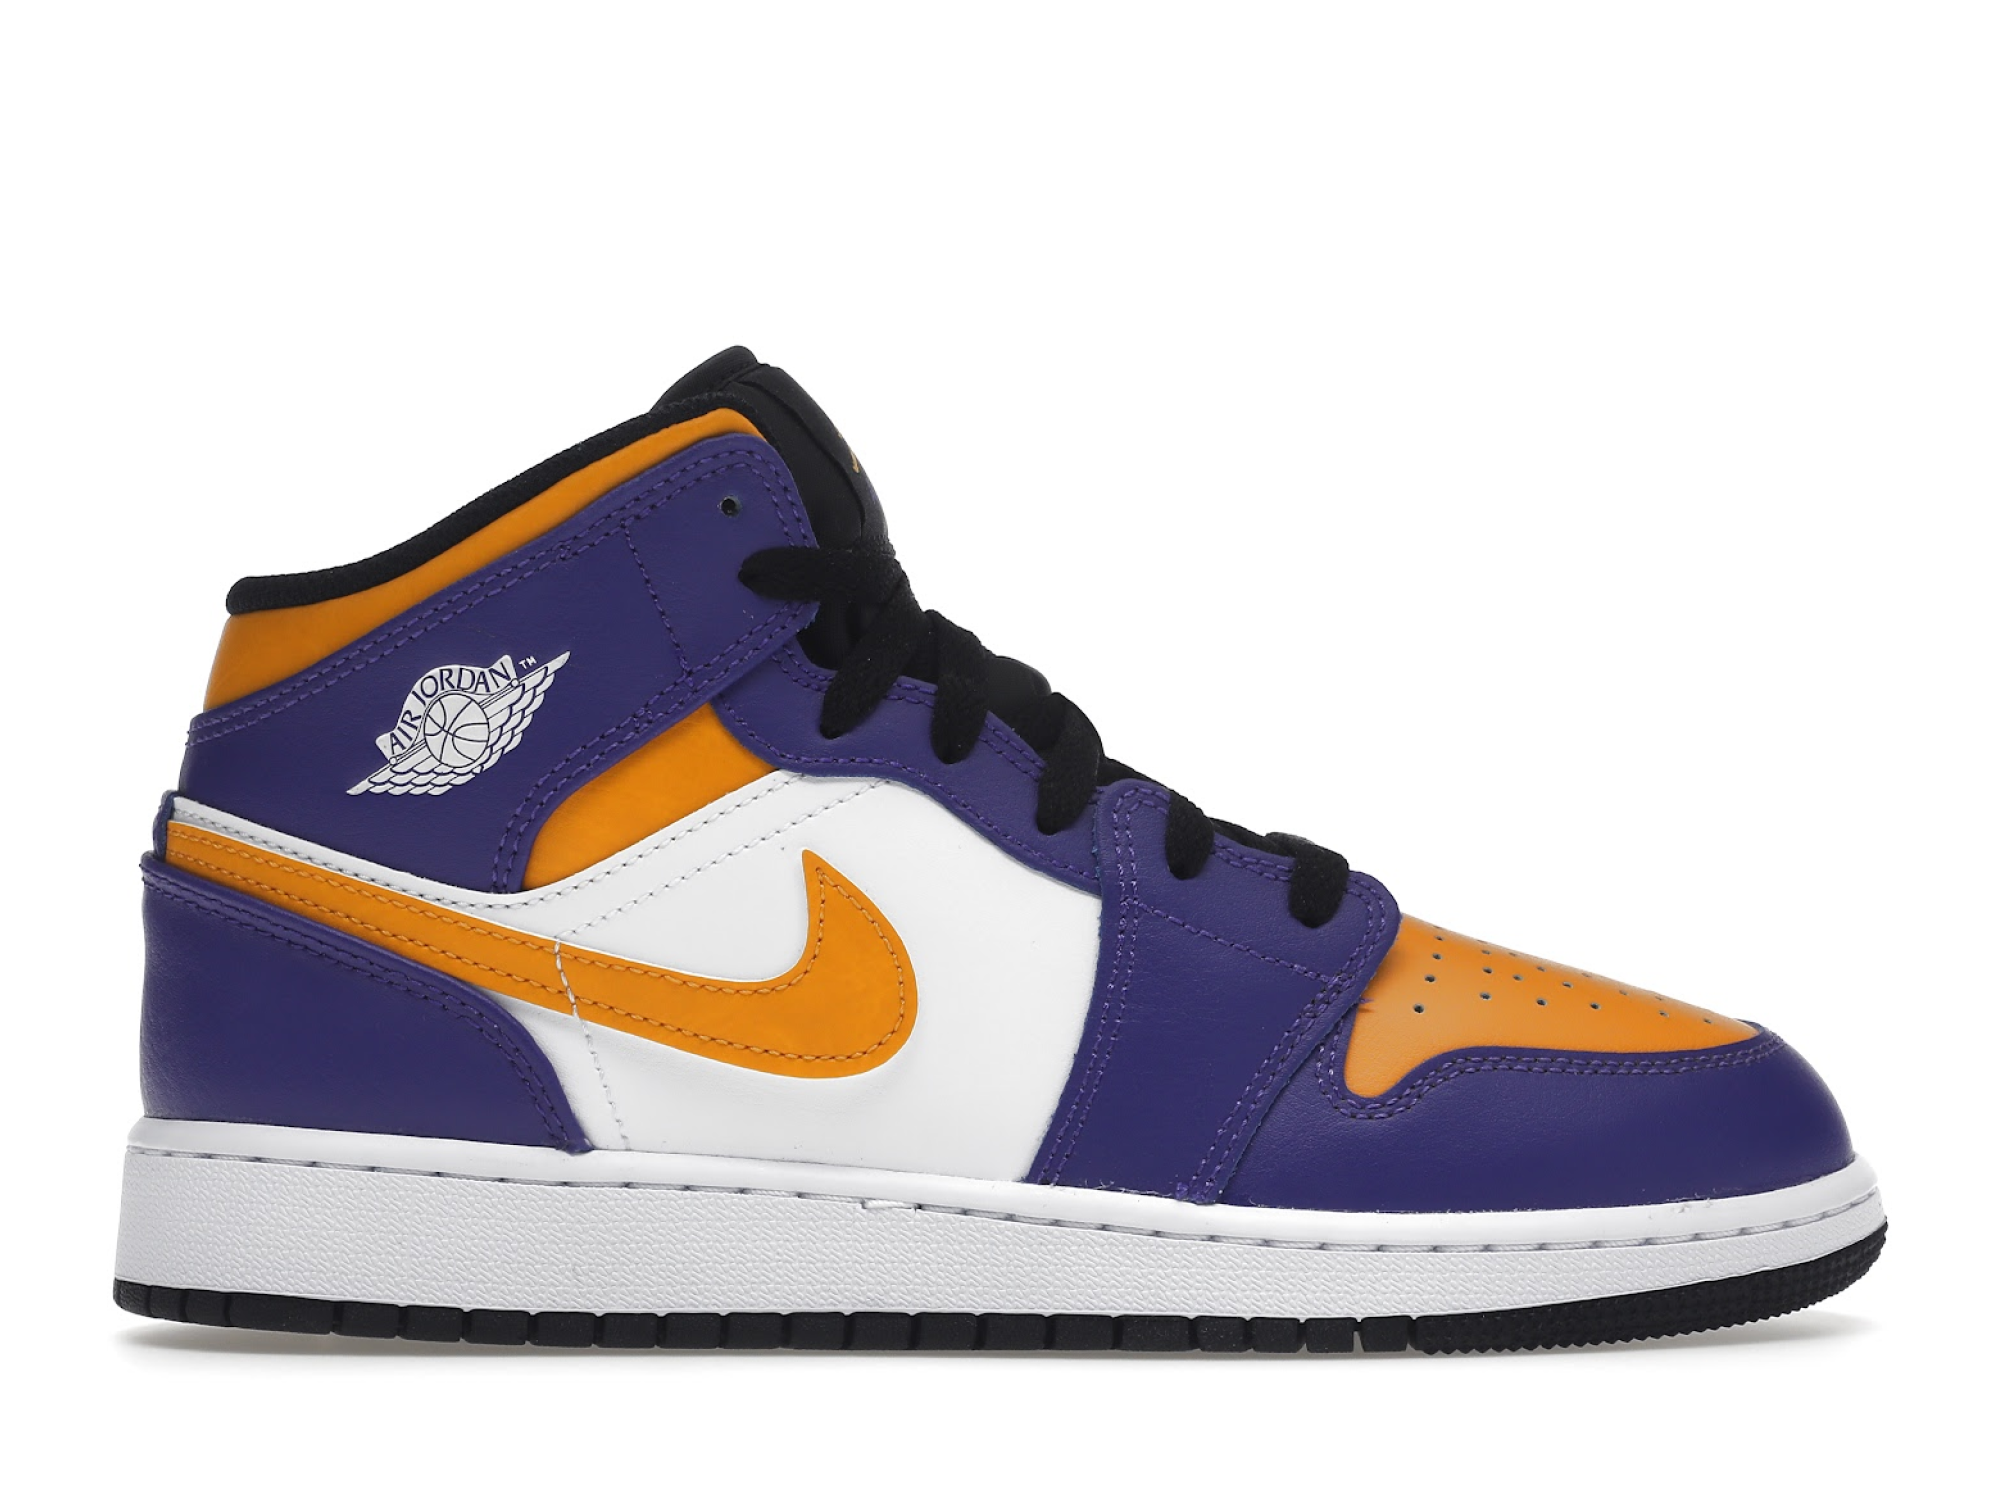 Air Jordan 1 – Page 2 – Need Some More